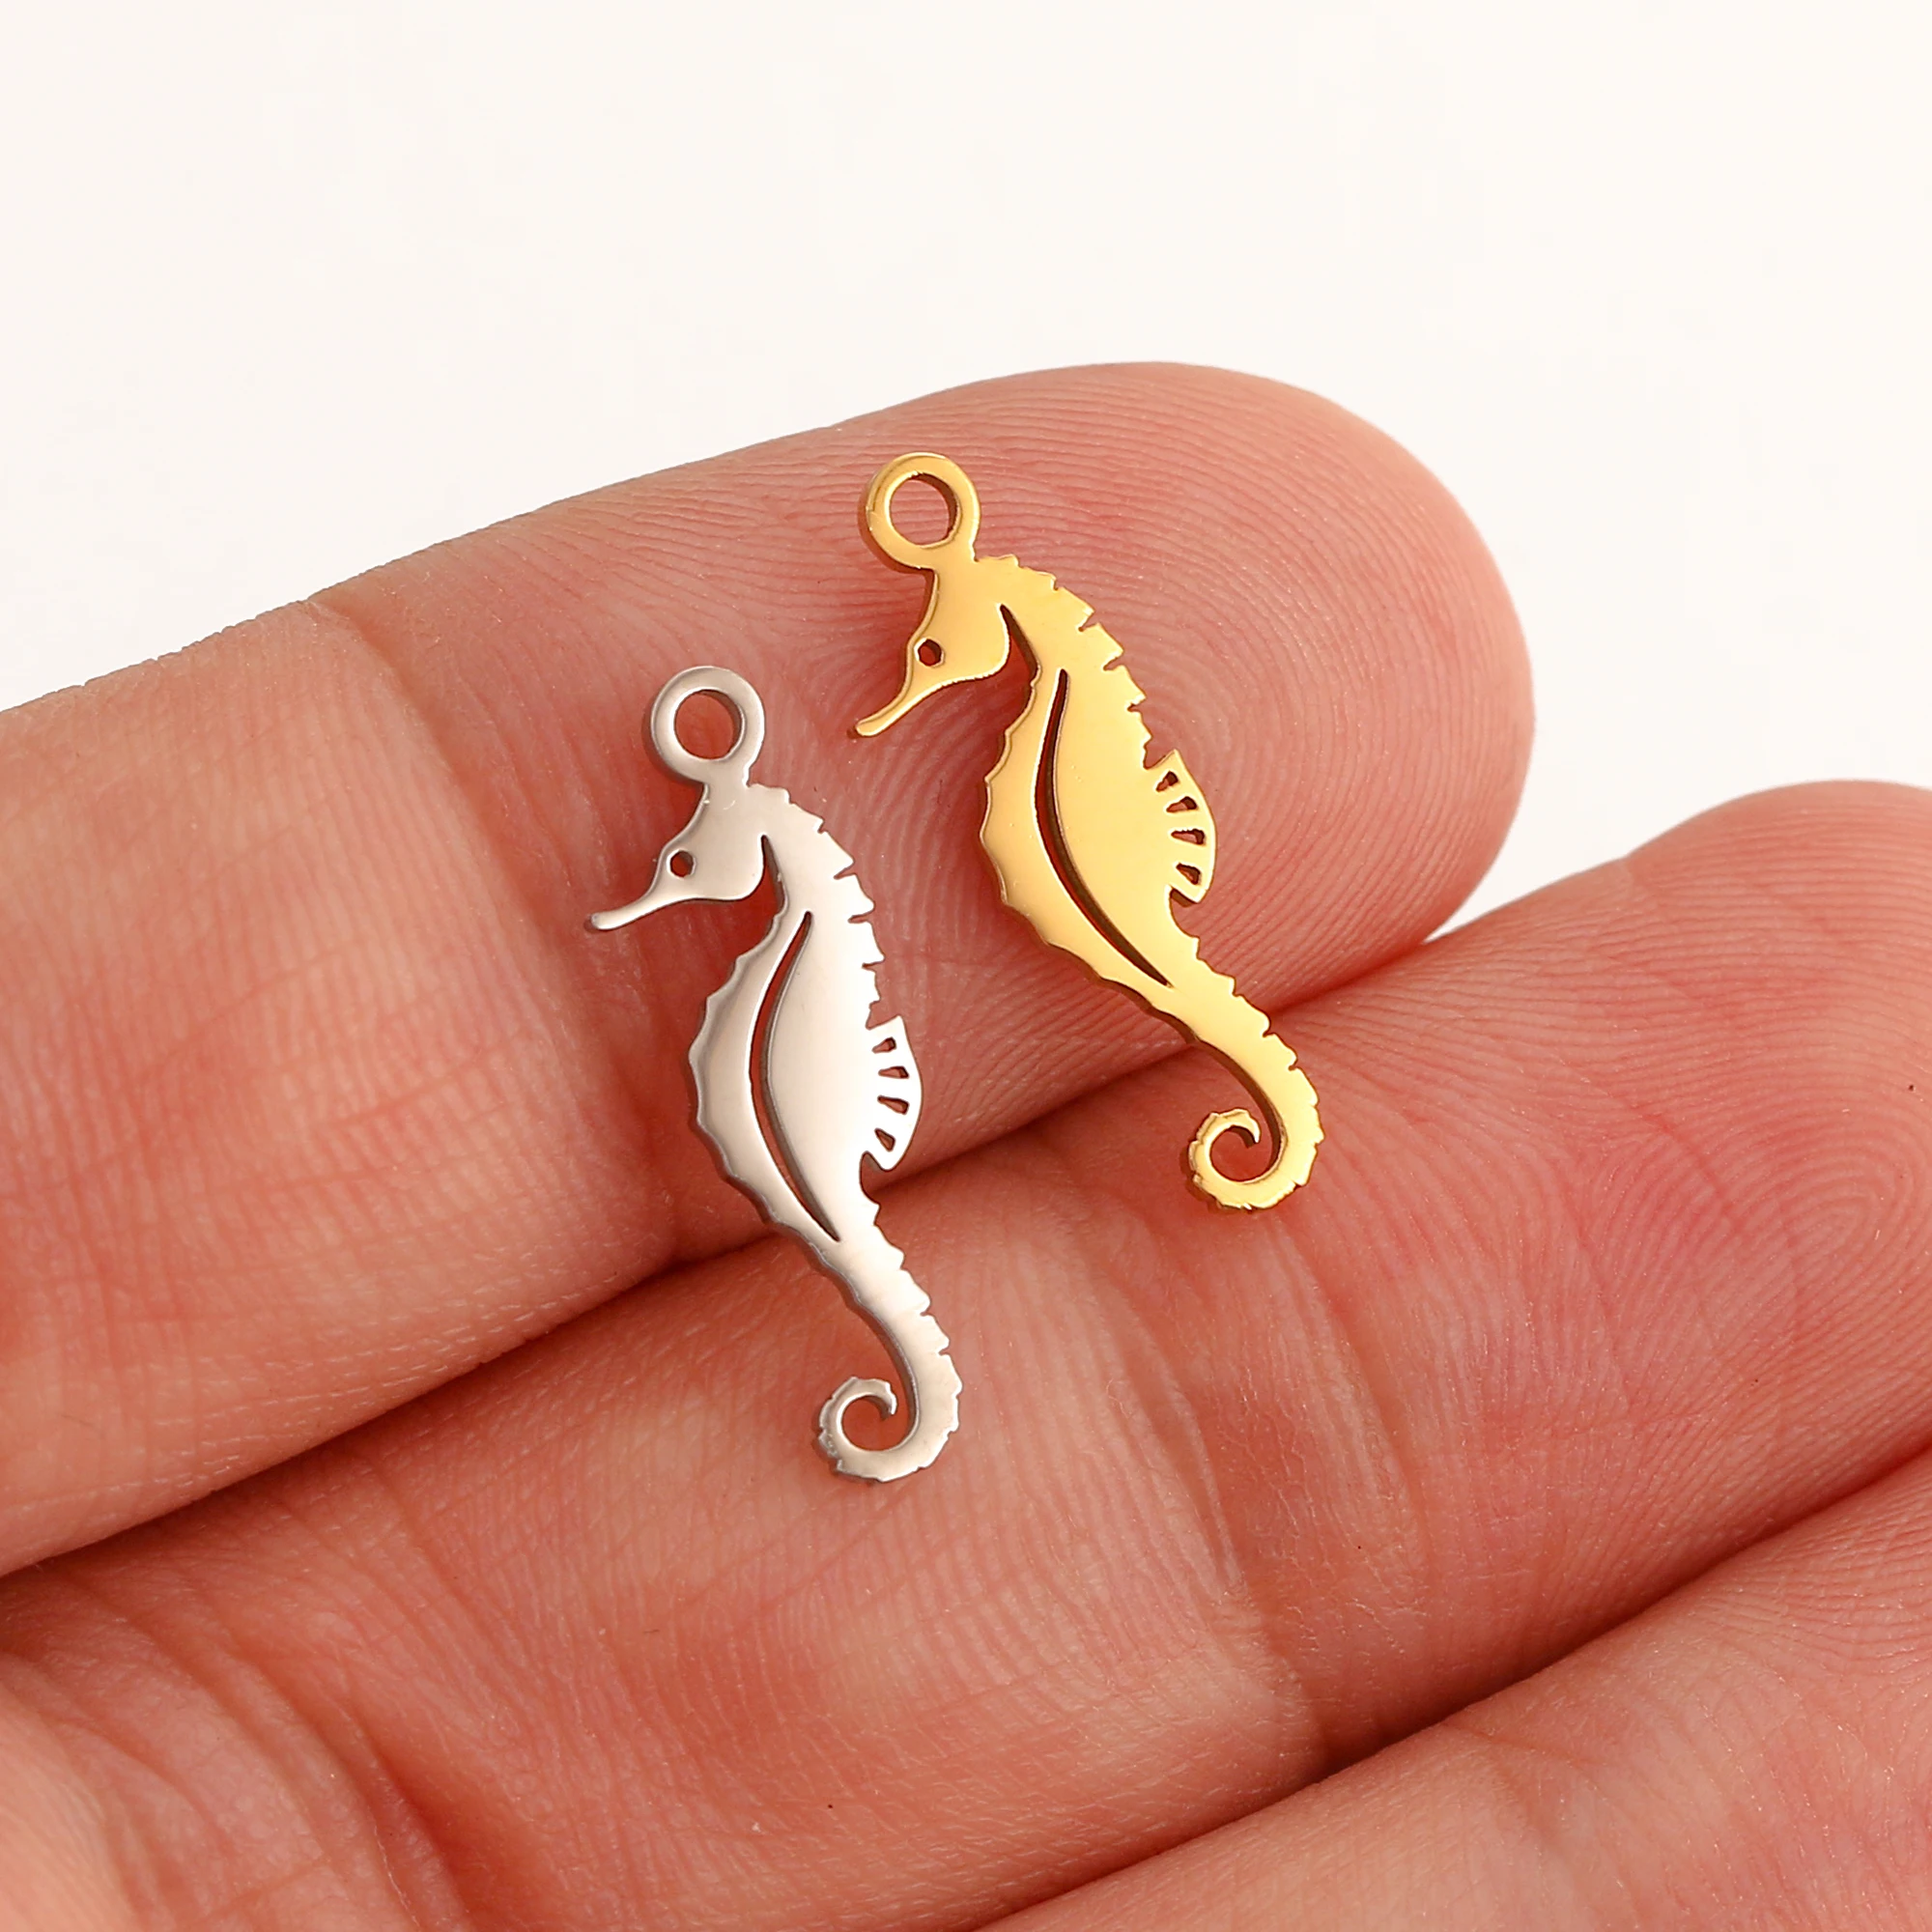 

5pc/lot Animal Tropical Marine Life Charms Ocean Theme Stainless Steel Sea Horse Pendant for Jewelry Making DIY Earring Necklace